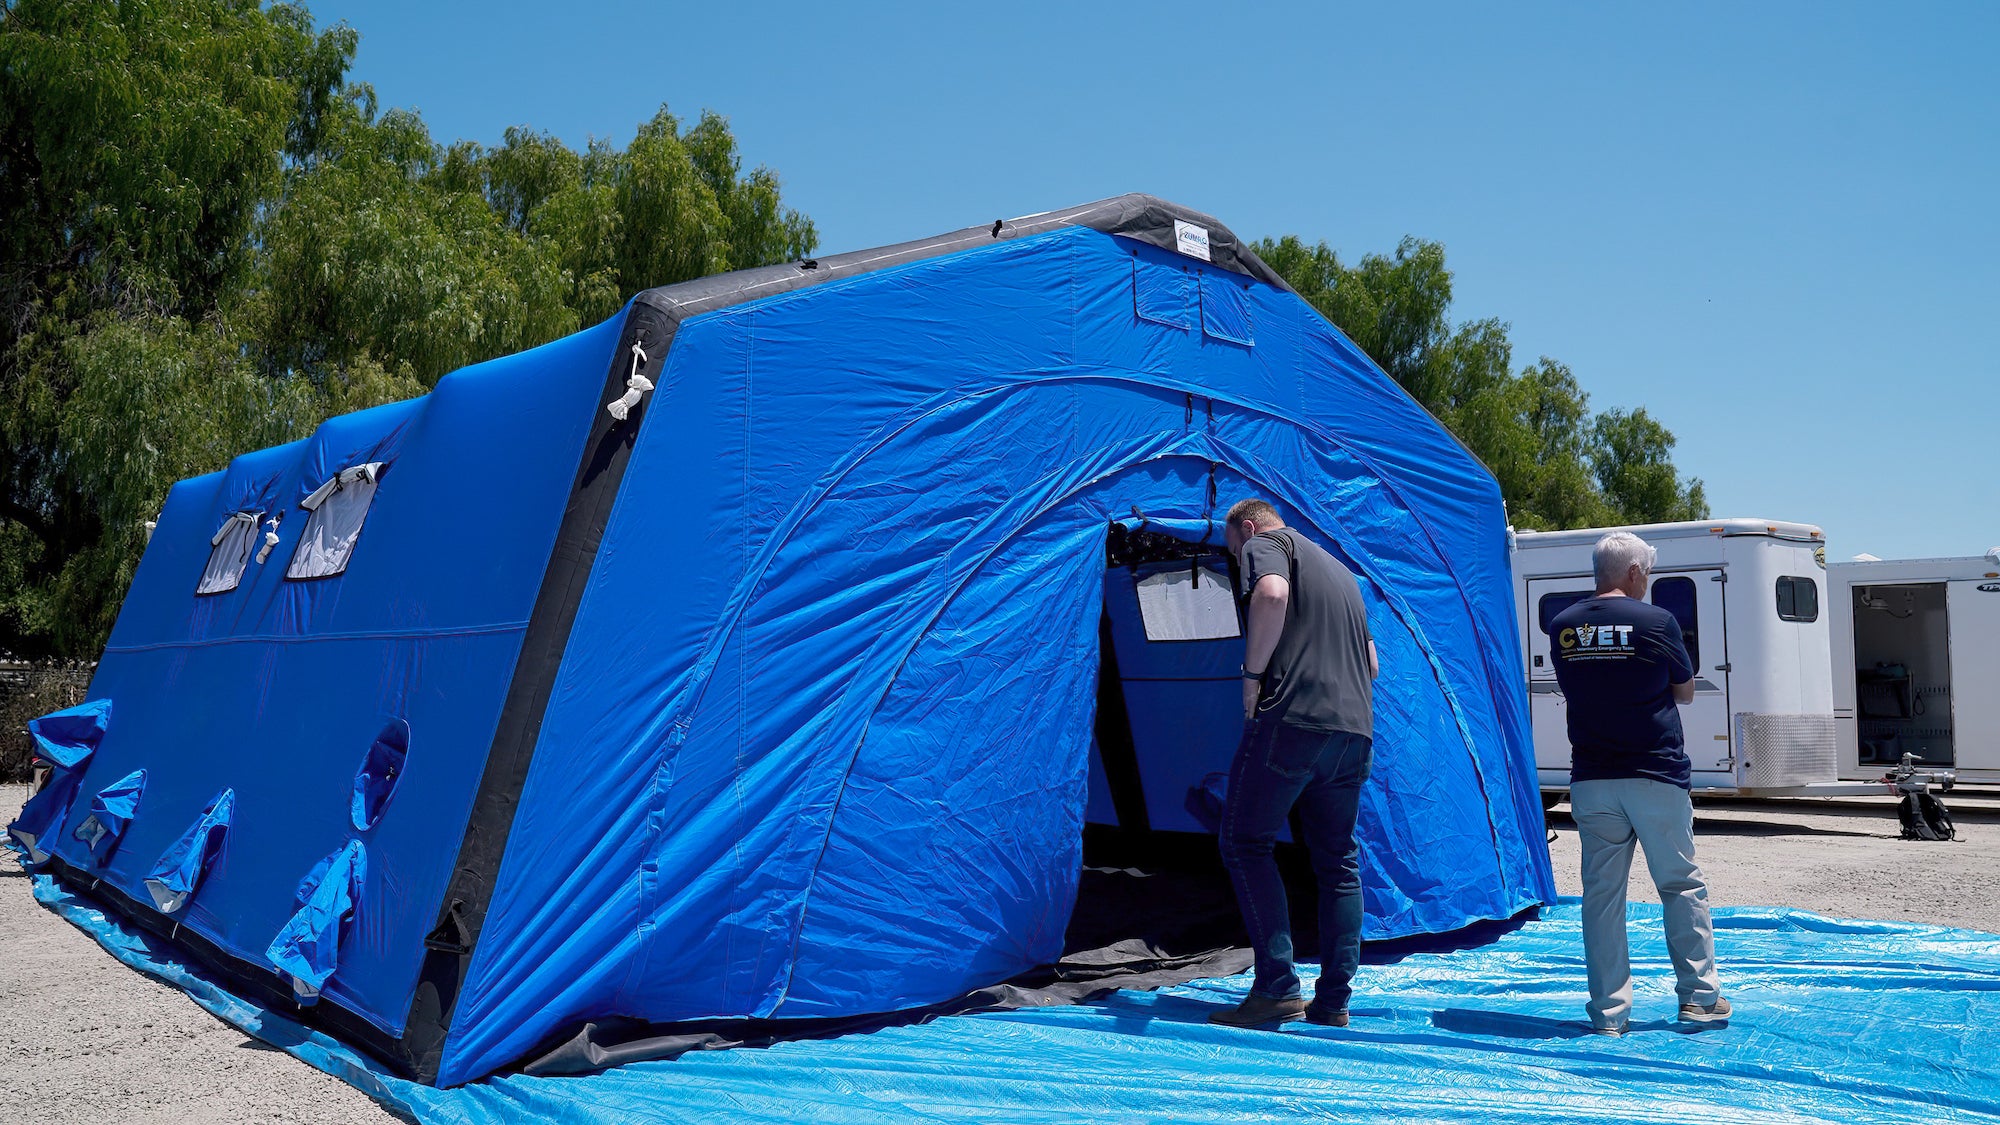 Big blue tent that serves as a temporary structure that can be used to treat animals or shelter personnel at a disaster response site. (Vu Dao / UC Davis)